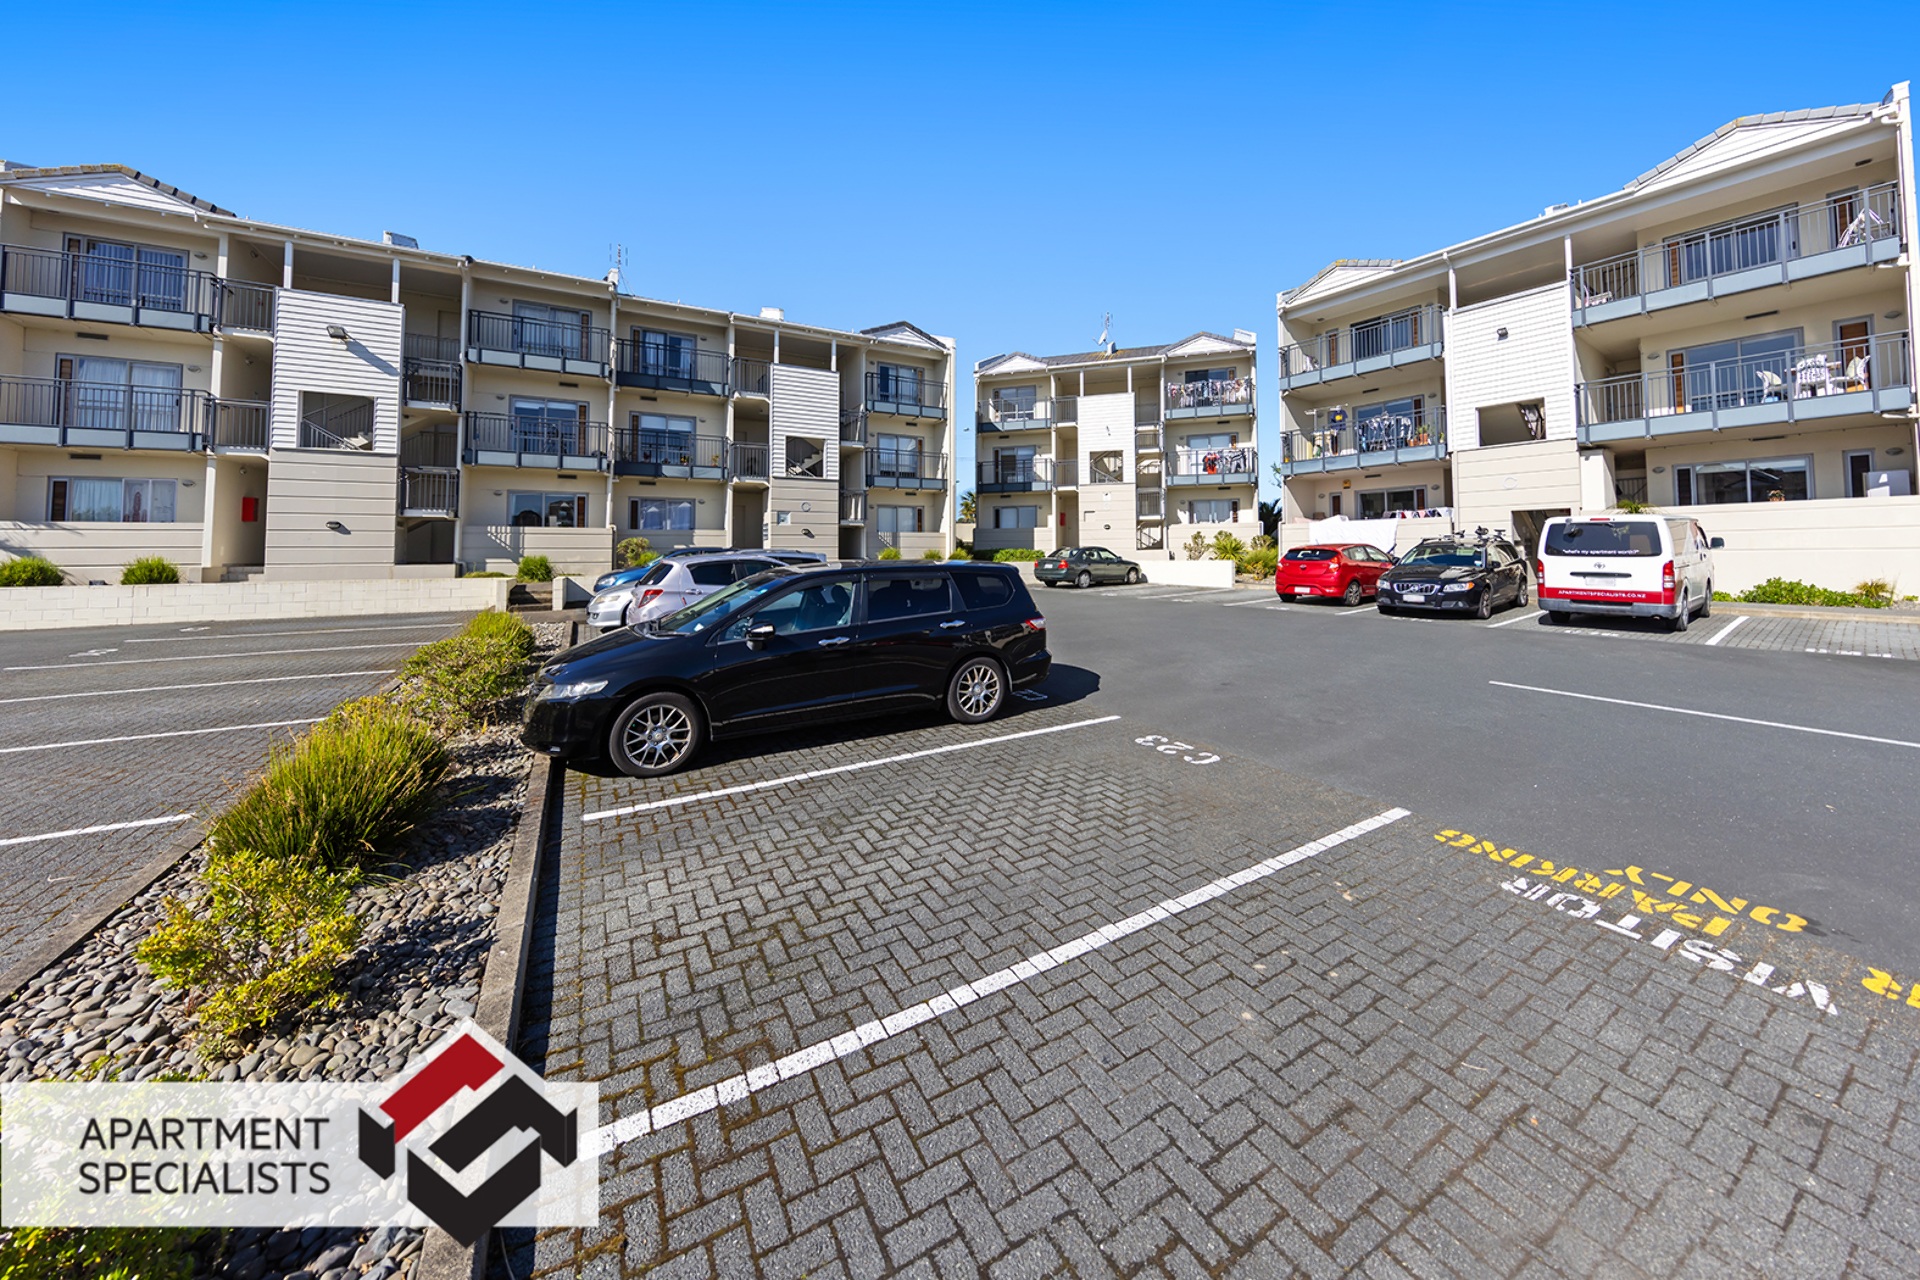 21 | 71 Spencer Road, Albany | Apartment Specialists